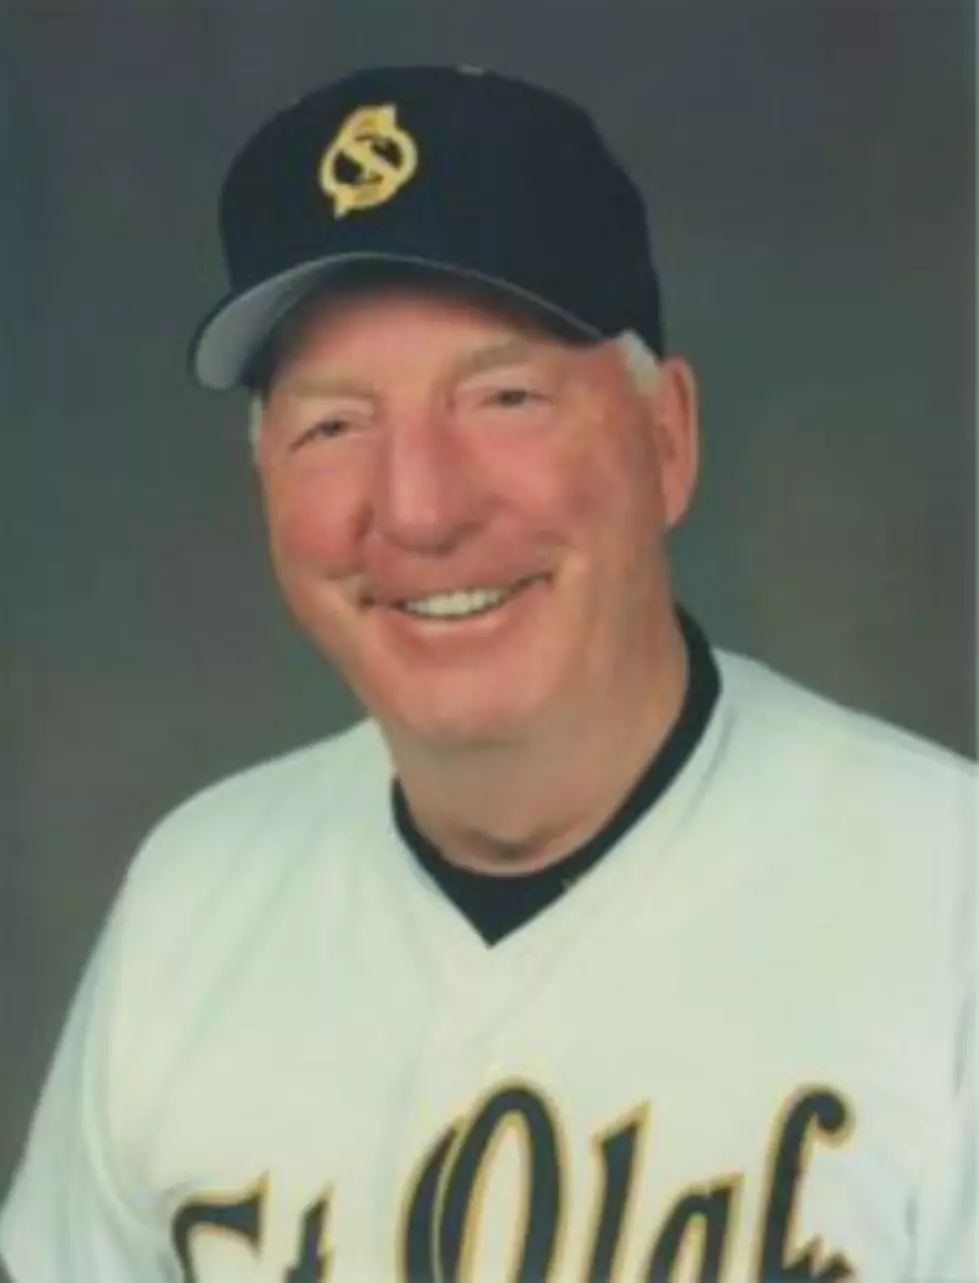 Funeral Plans Finalized for Legendary St. Olaf Baseball Coach